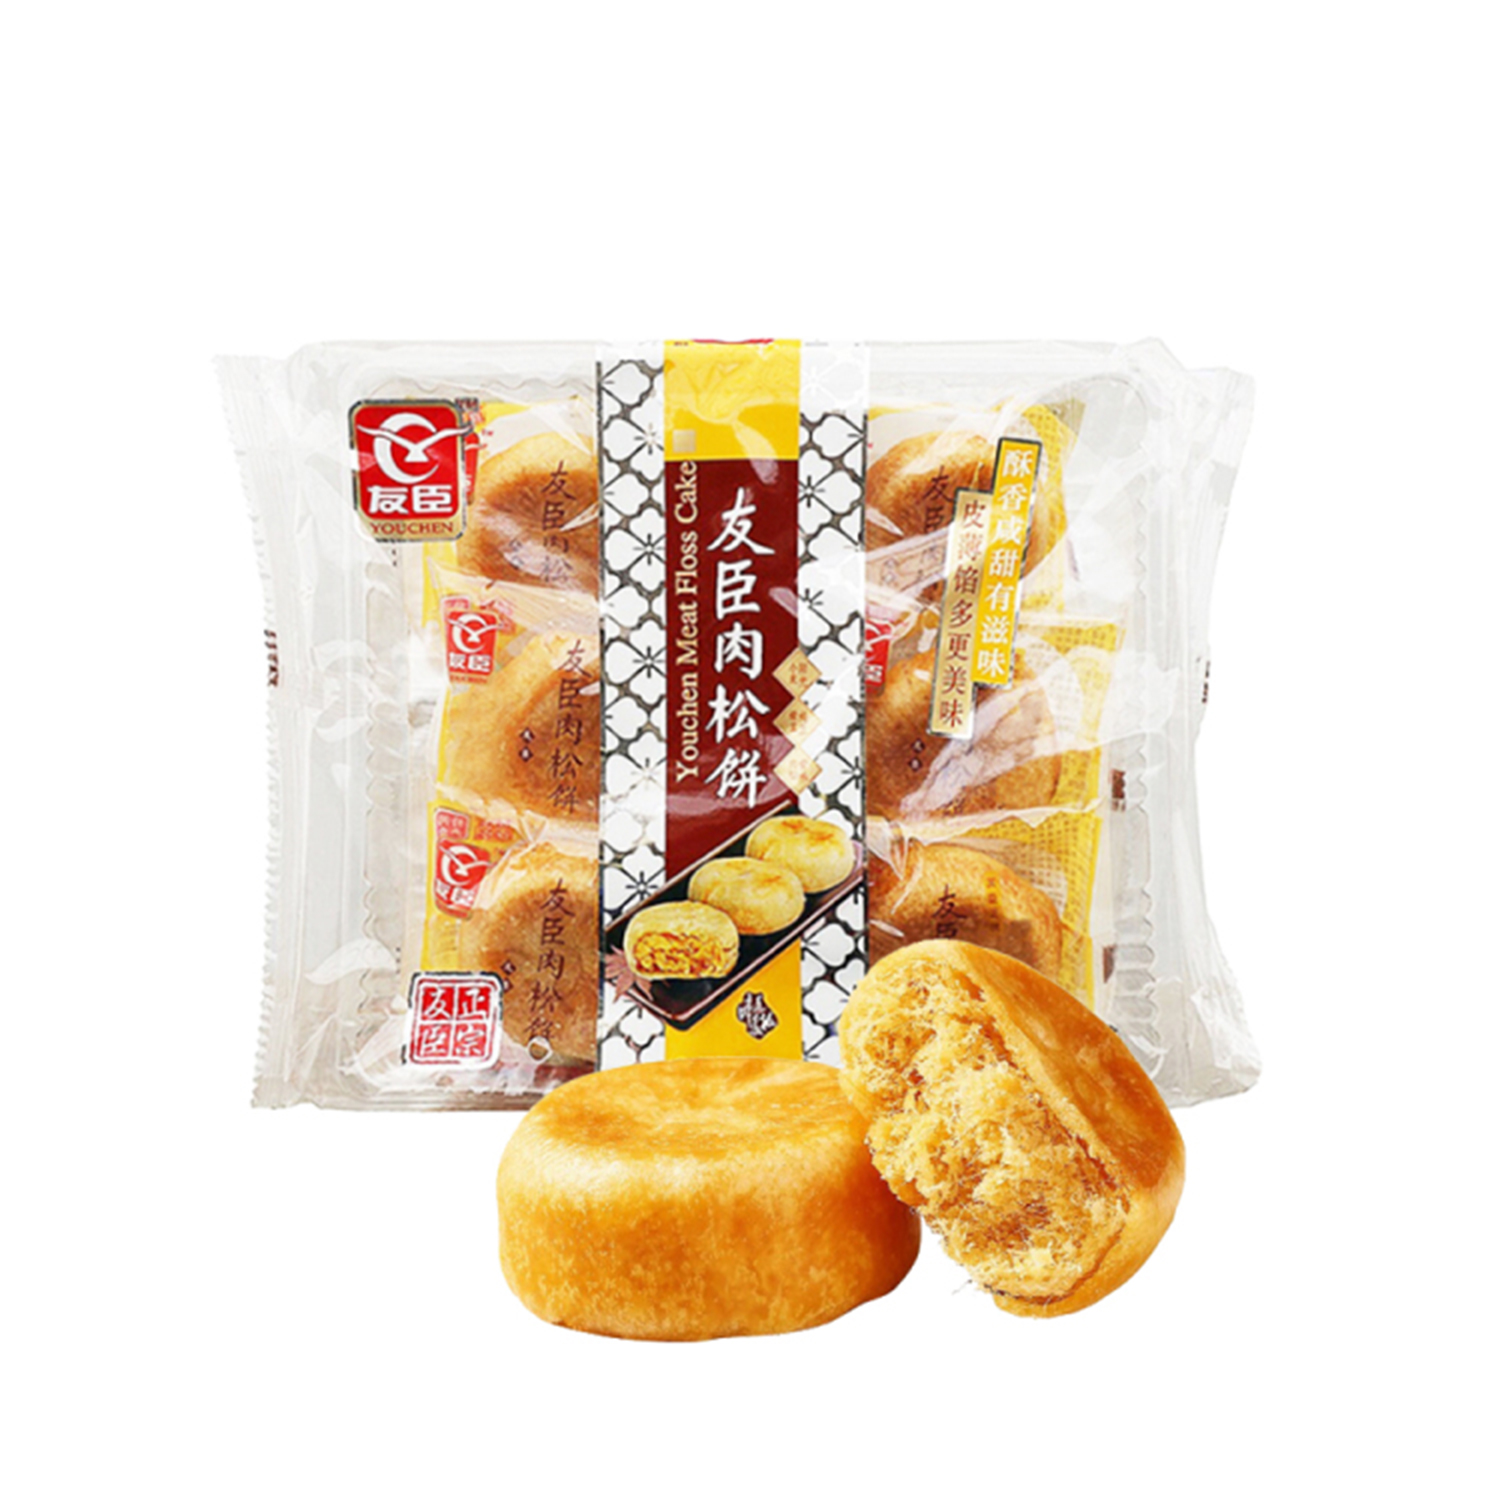 YC Chicken Meat Floss Cake Pie Original Flavour 6pcs 208g X 3Pack-eBest-Biscuits,Snacks & Confectionery